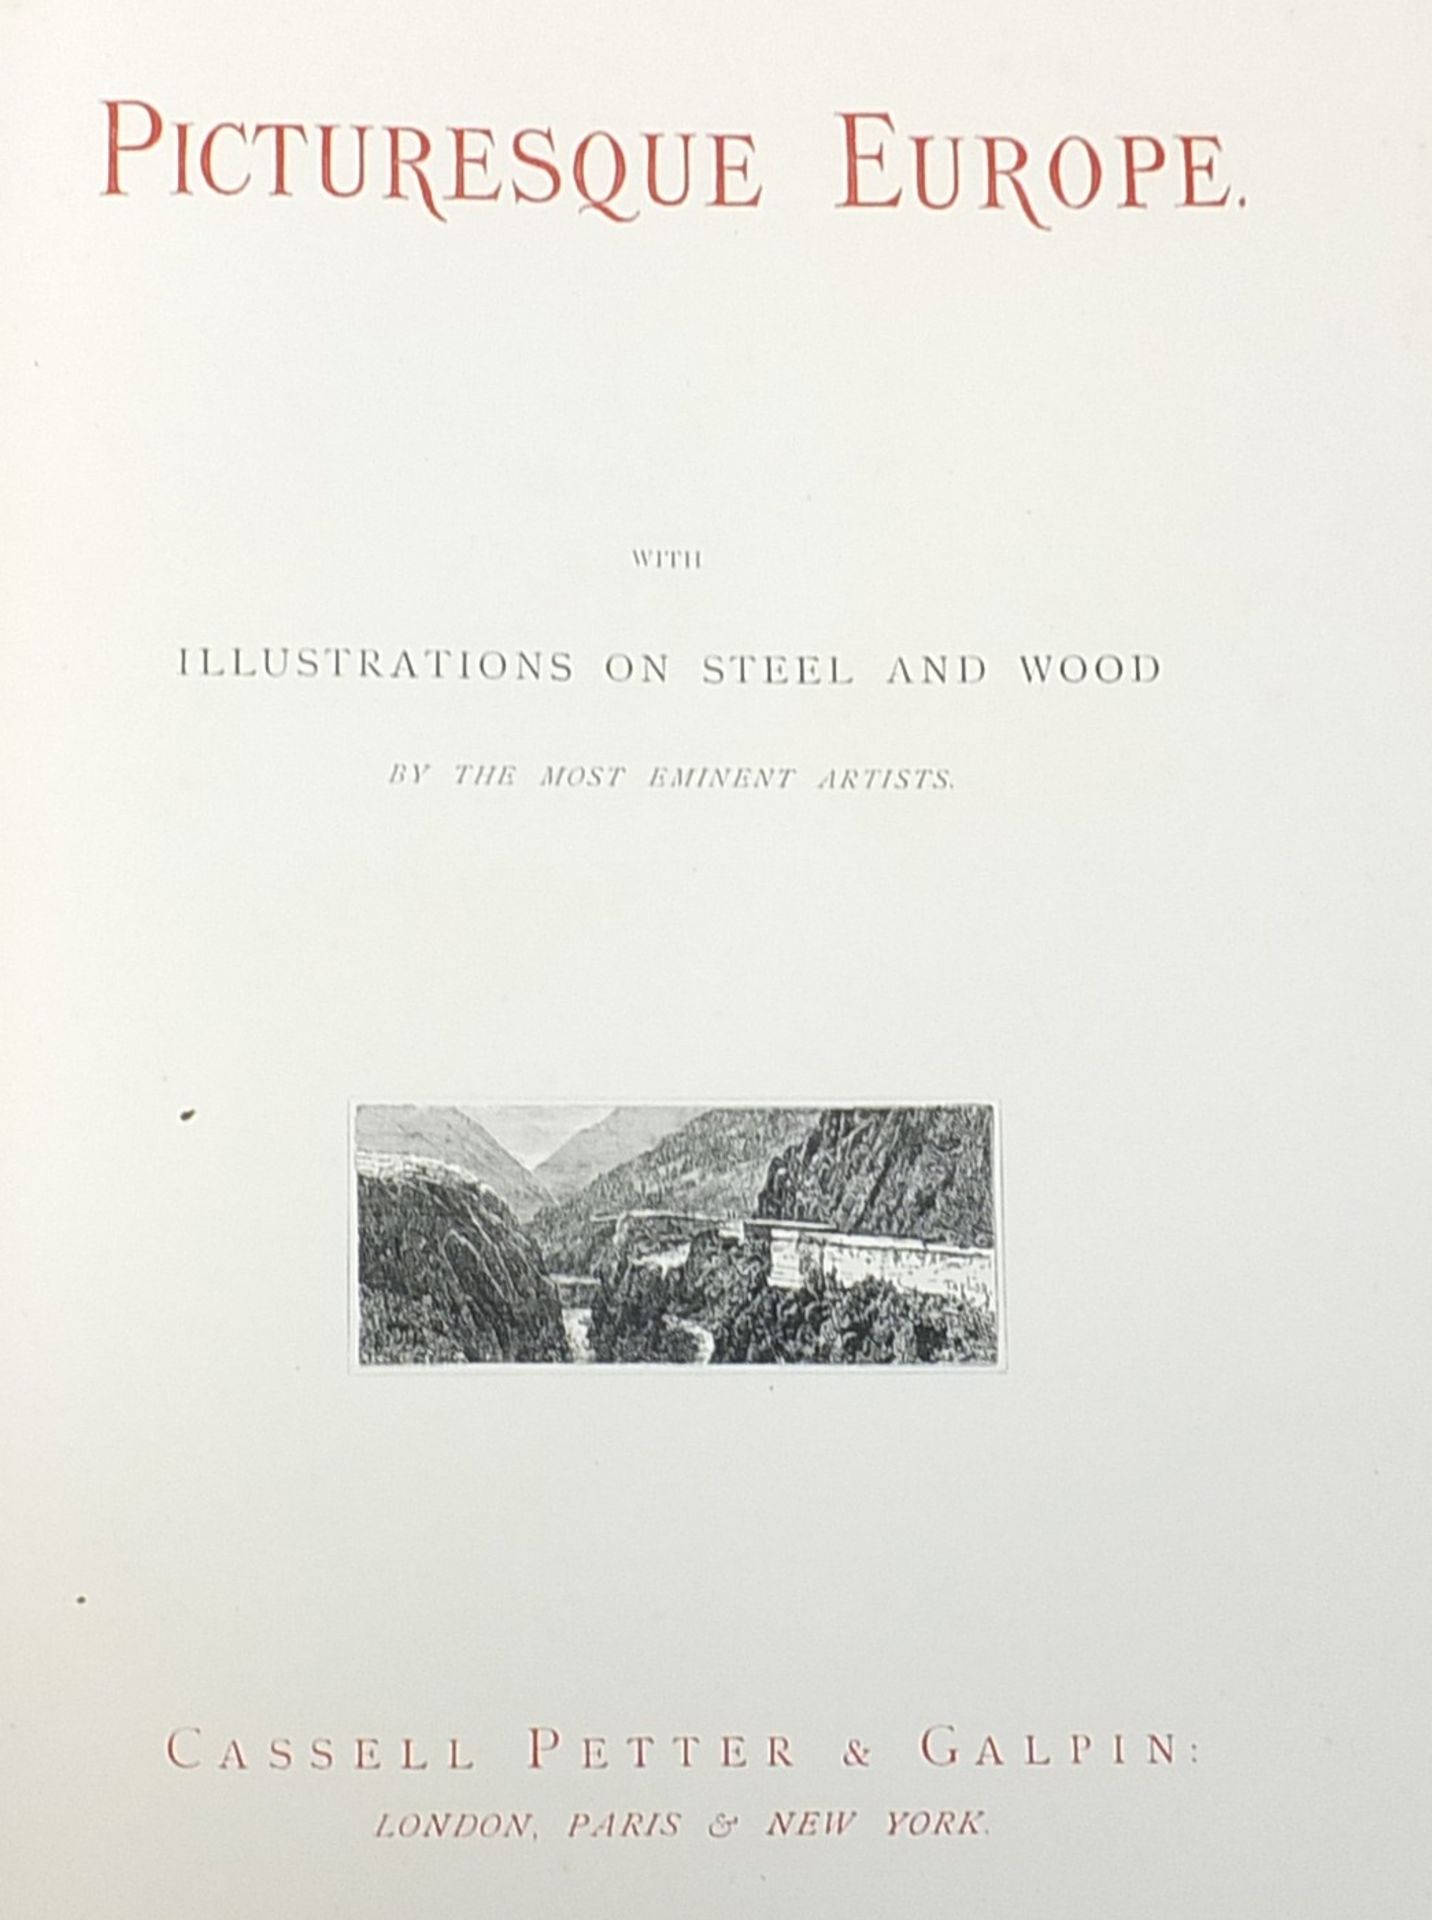 Two volumes of Picturesque Europe with Illustrations on Steel and Wood by Cassell, Petter and - Image 6 of 9